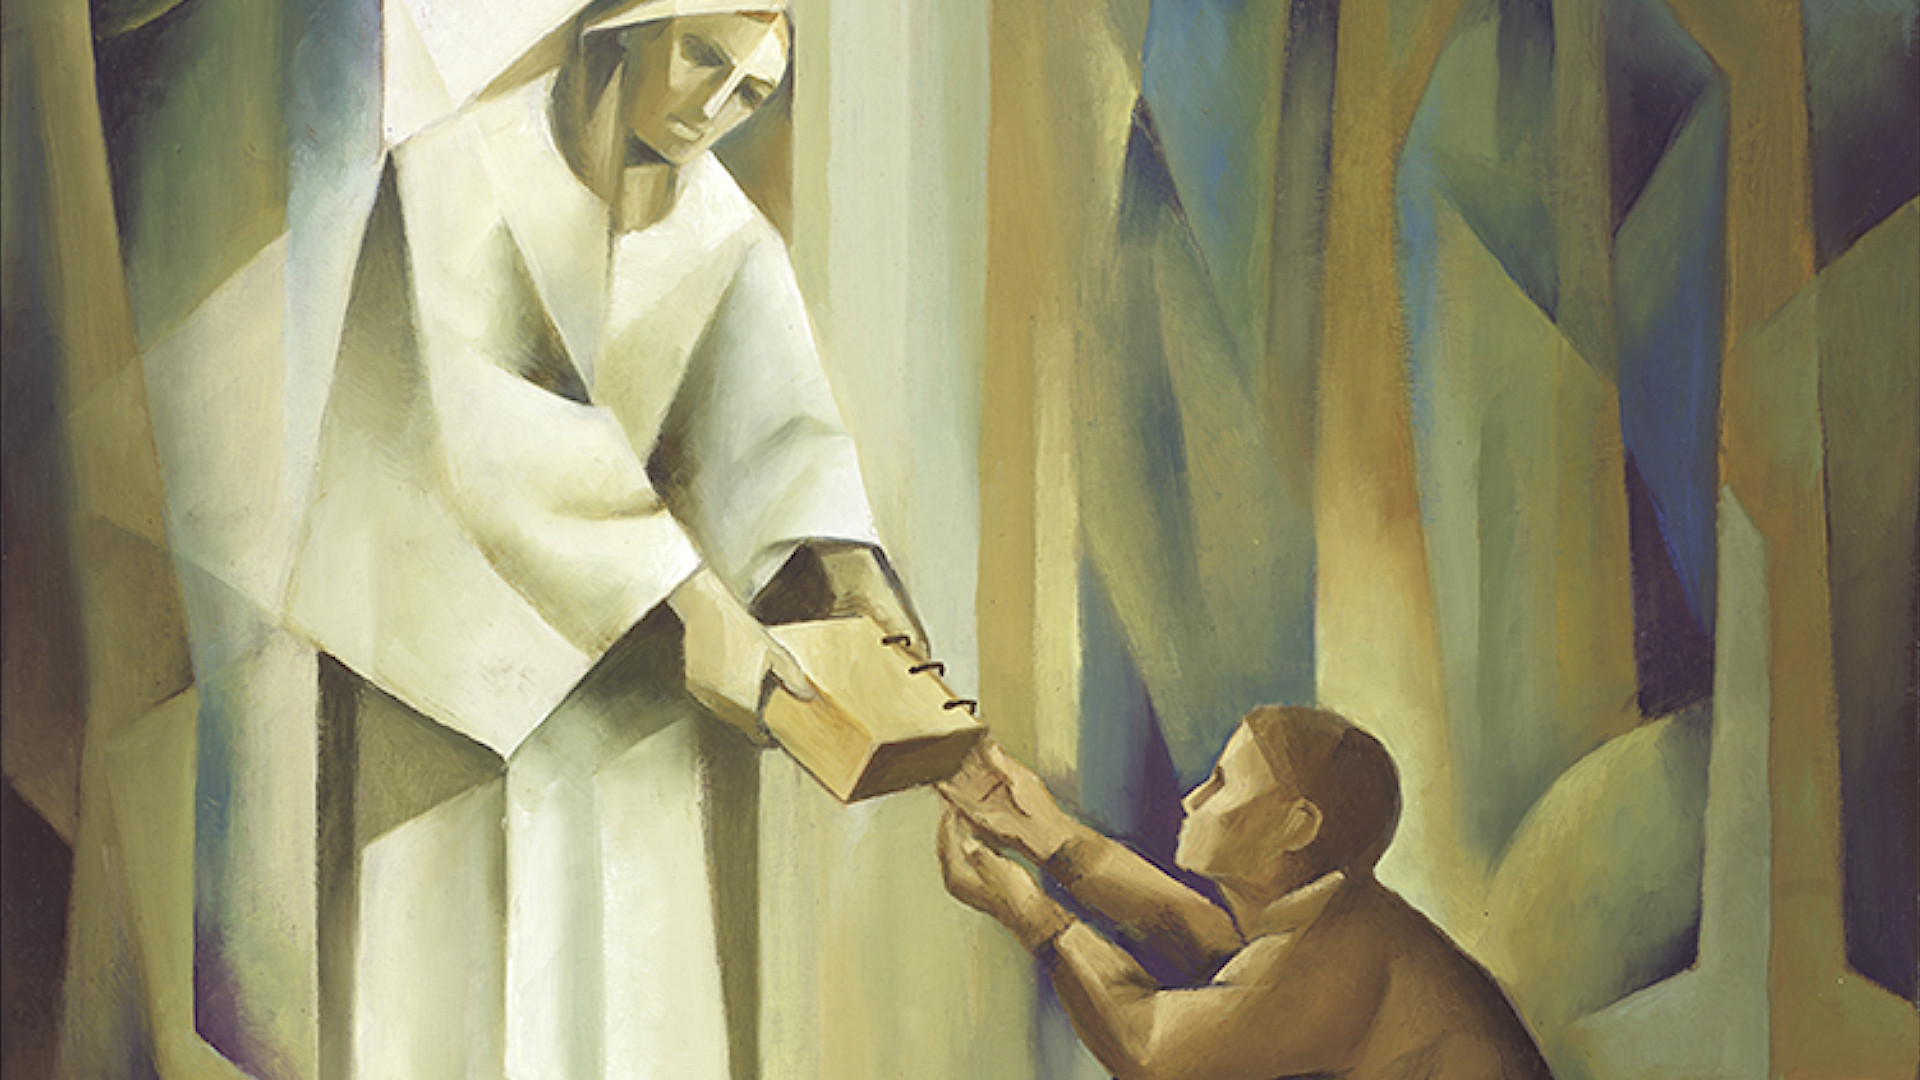 Detail from “Moroni and Joseph” by Jorge Cocco Santangelo